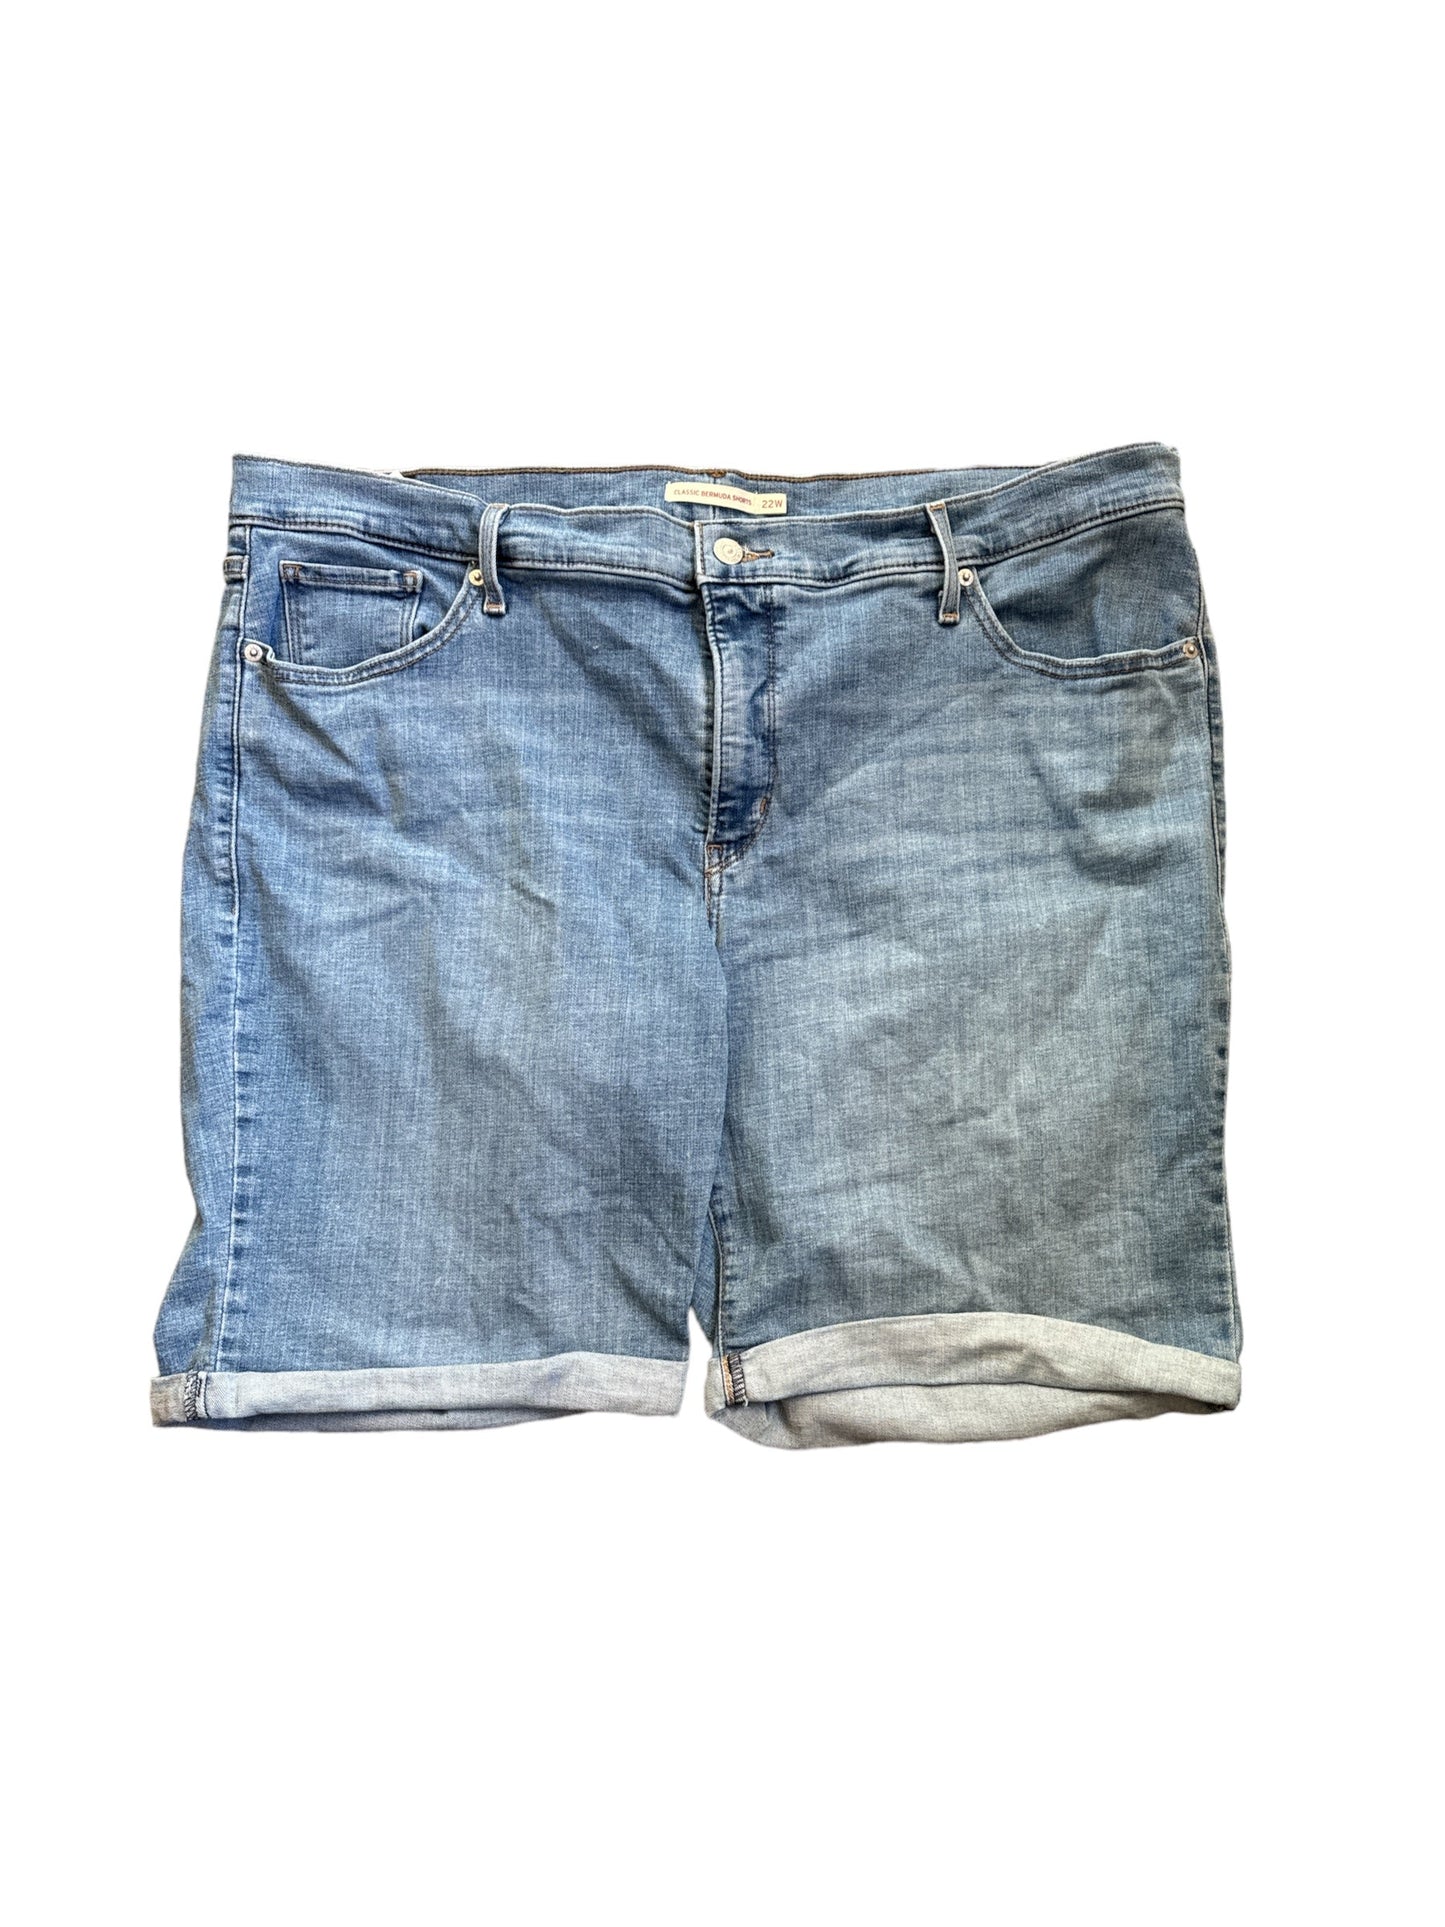 Shorts By Levis  Size: 22